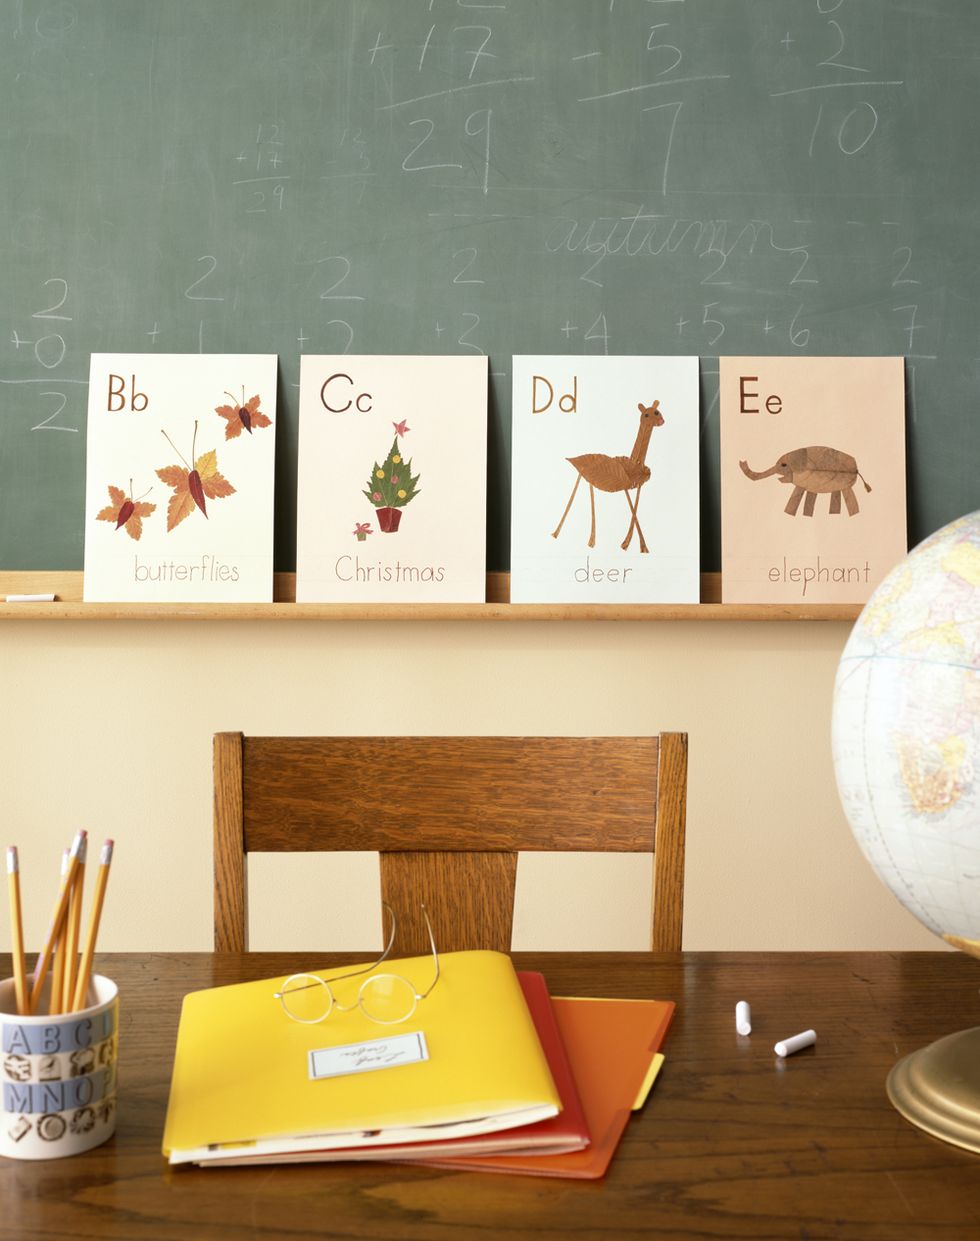 Desk in front of chalkboard with alphabet flash cards on in classroom